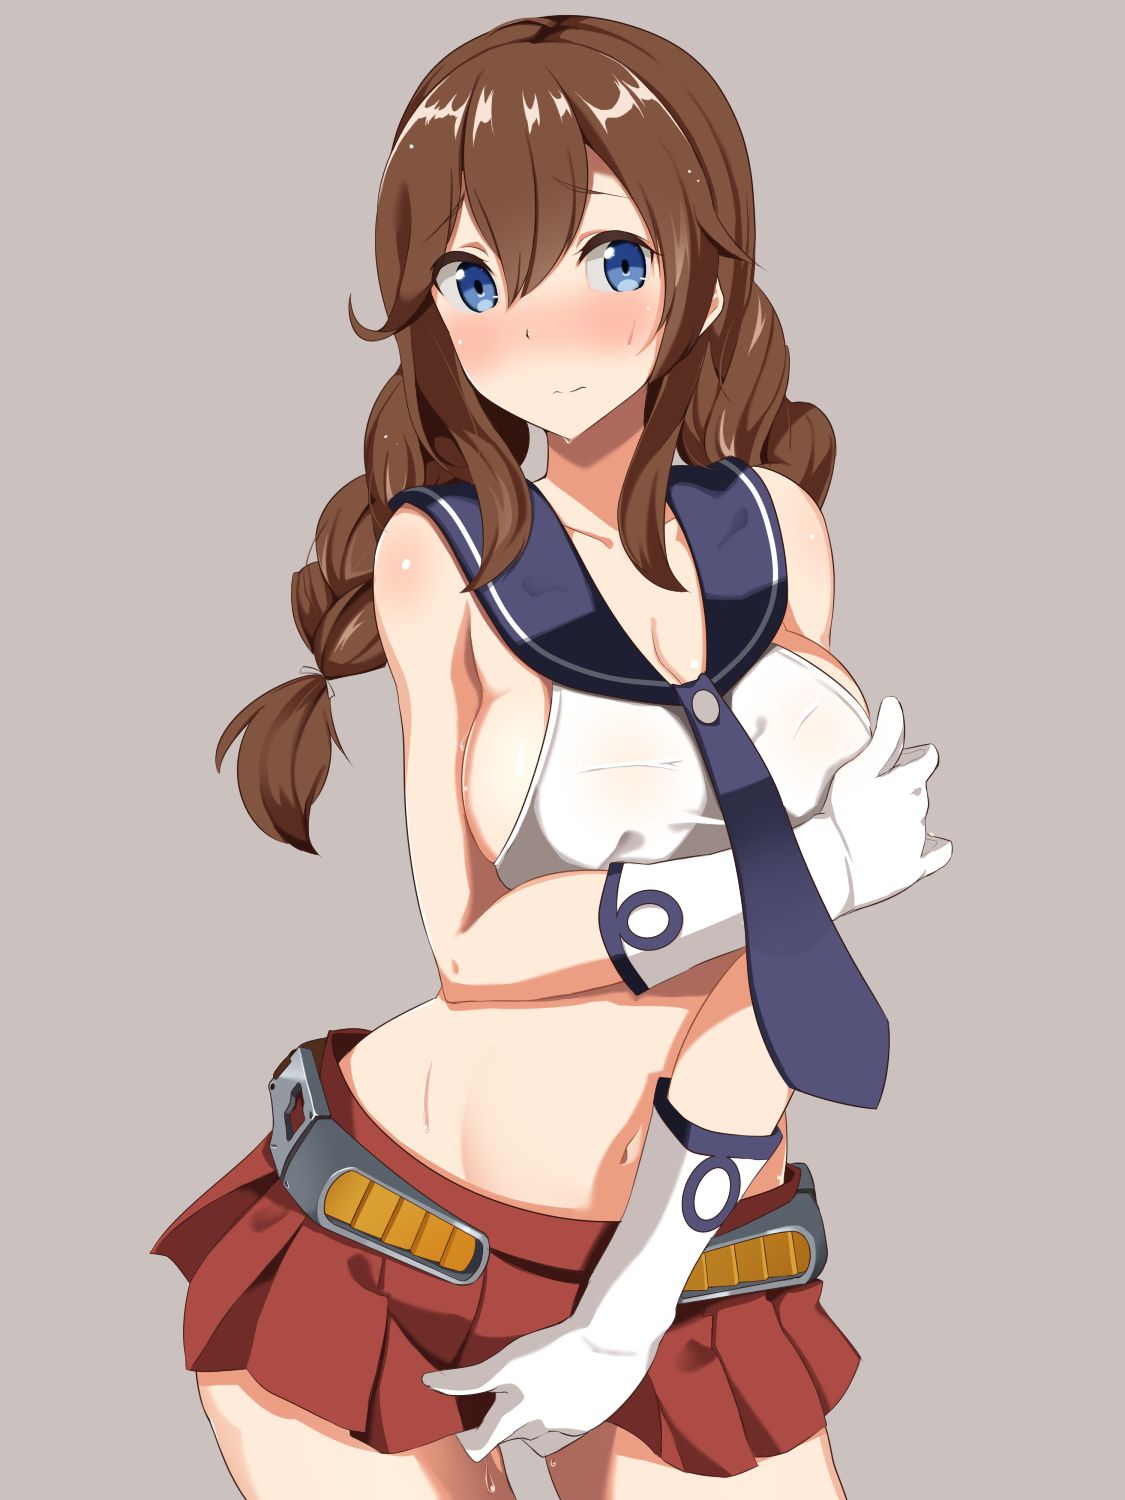 [Secondary zip] Cute ship This is a little piece of the image summary of Noshiro-chan 49